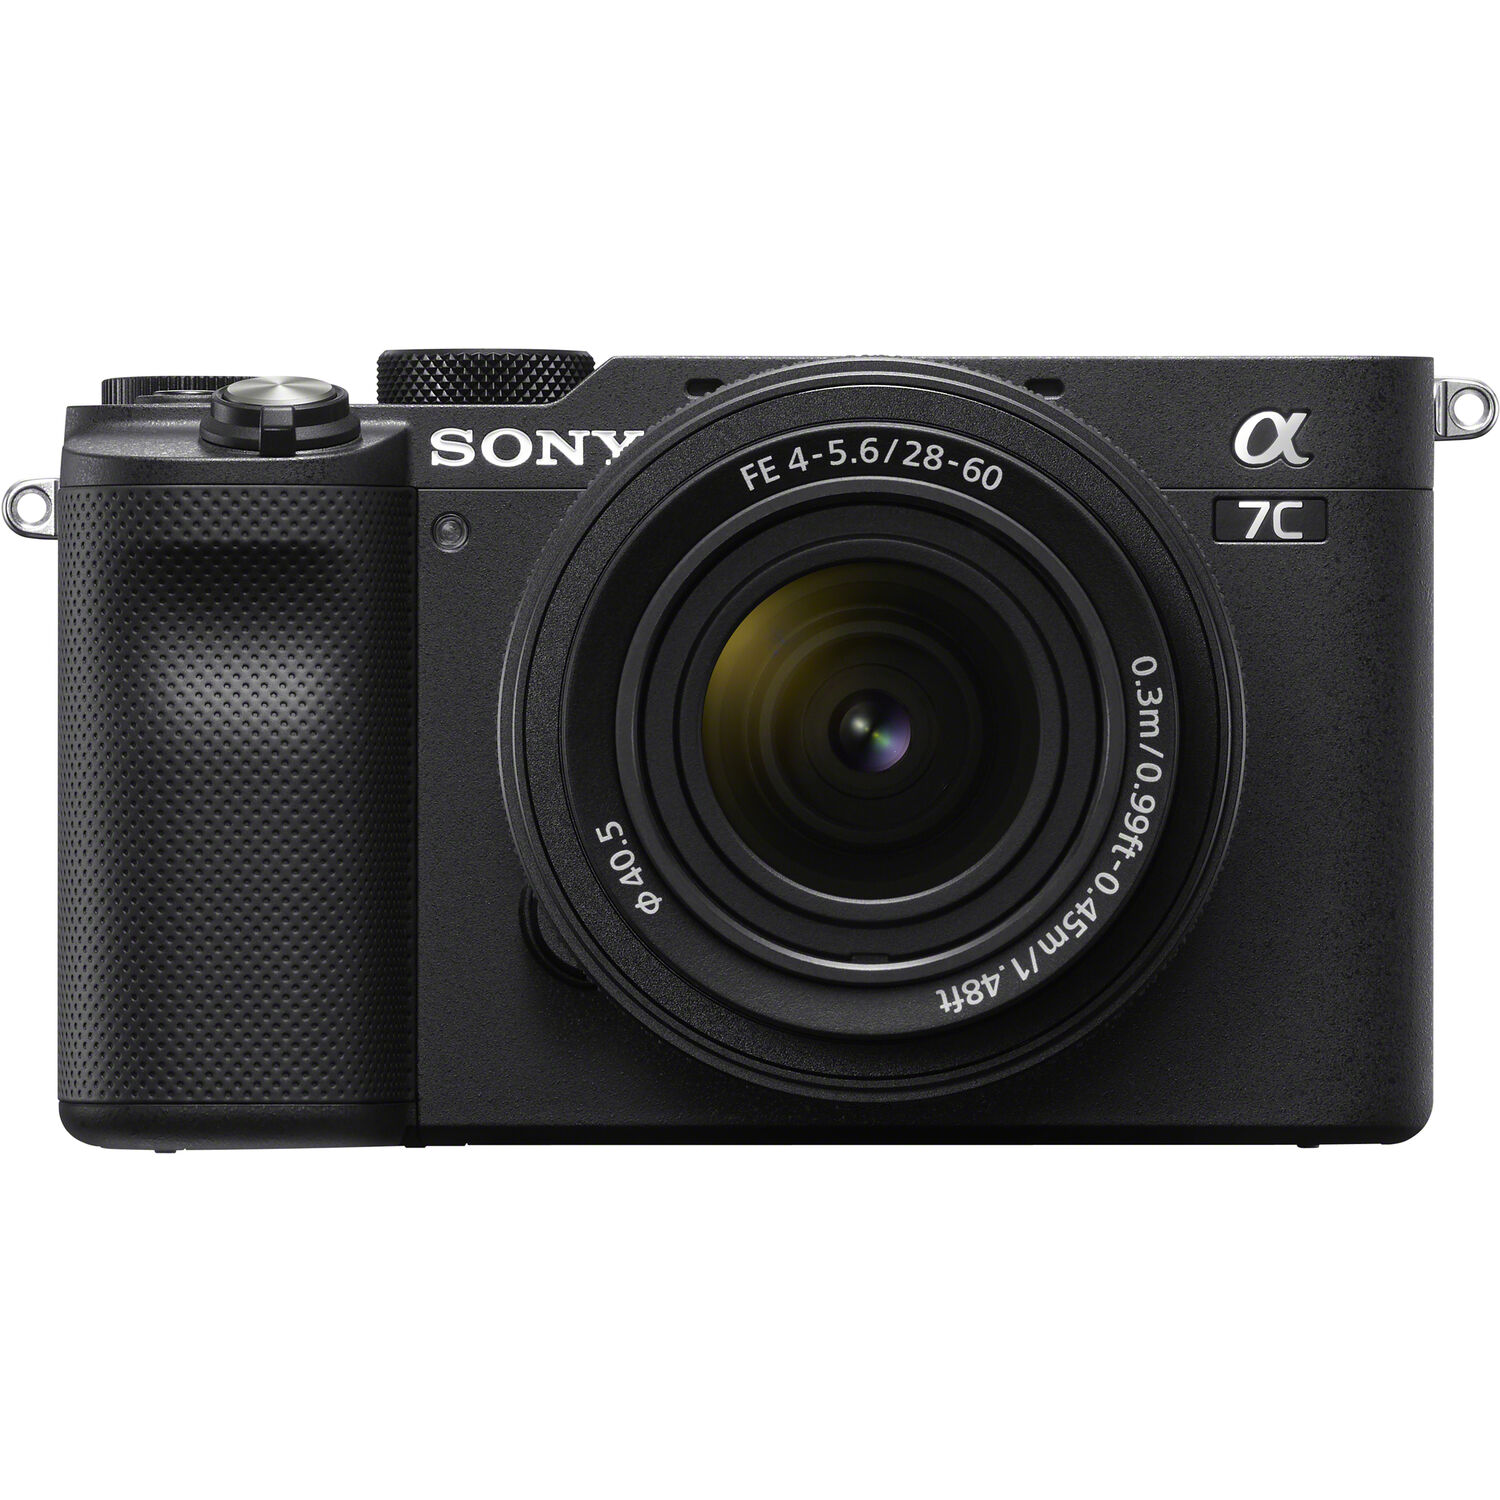 Sony Alpha a7C Mirrorless Camera Kit with FE 28-60mm Lens (Black)